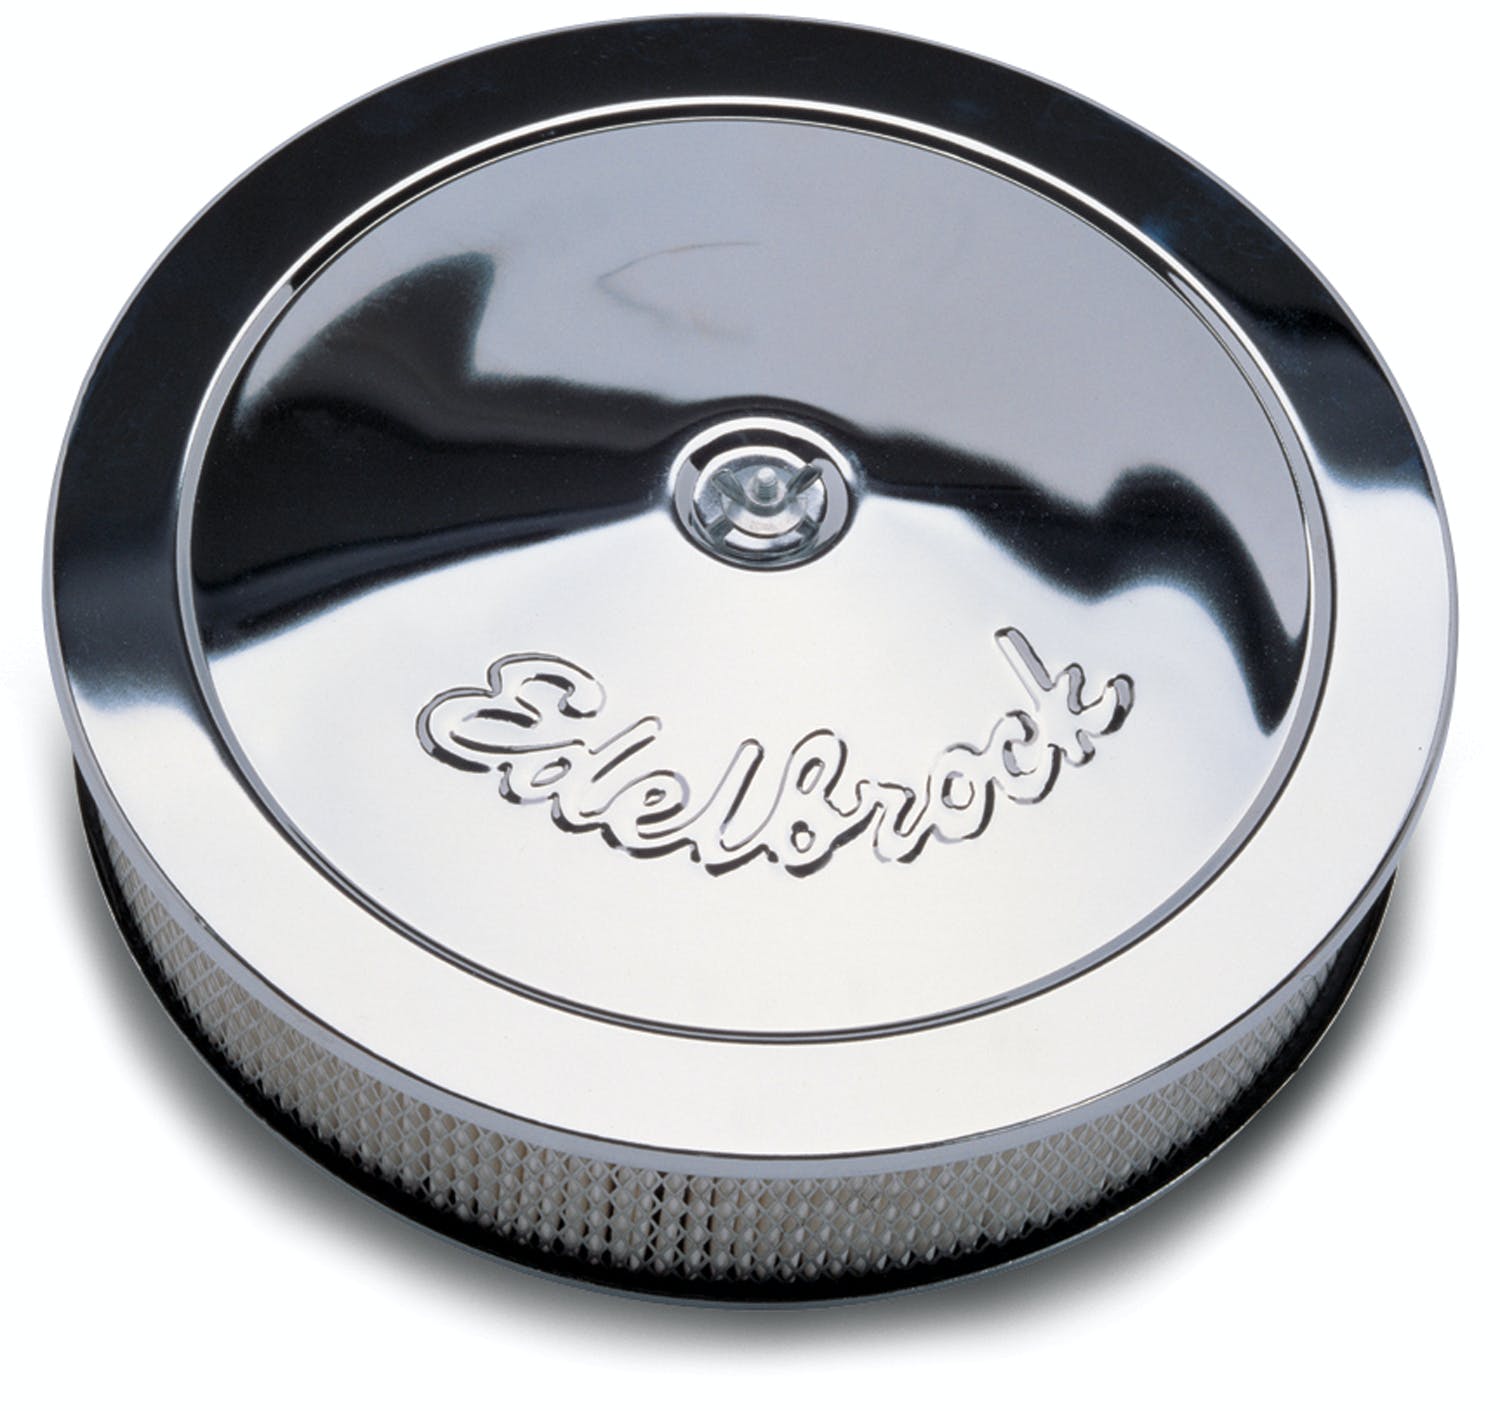 Edelbrock 1207 Pro-Flo Chrome 14 Round Air Cleaner with 3 Paper Element